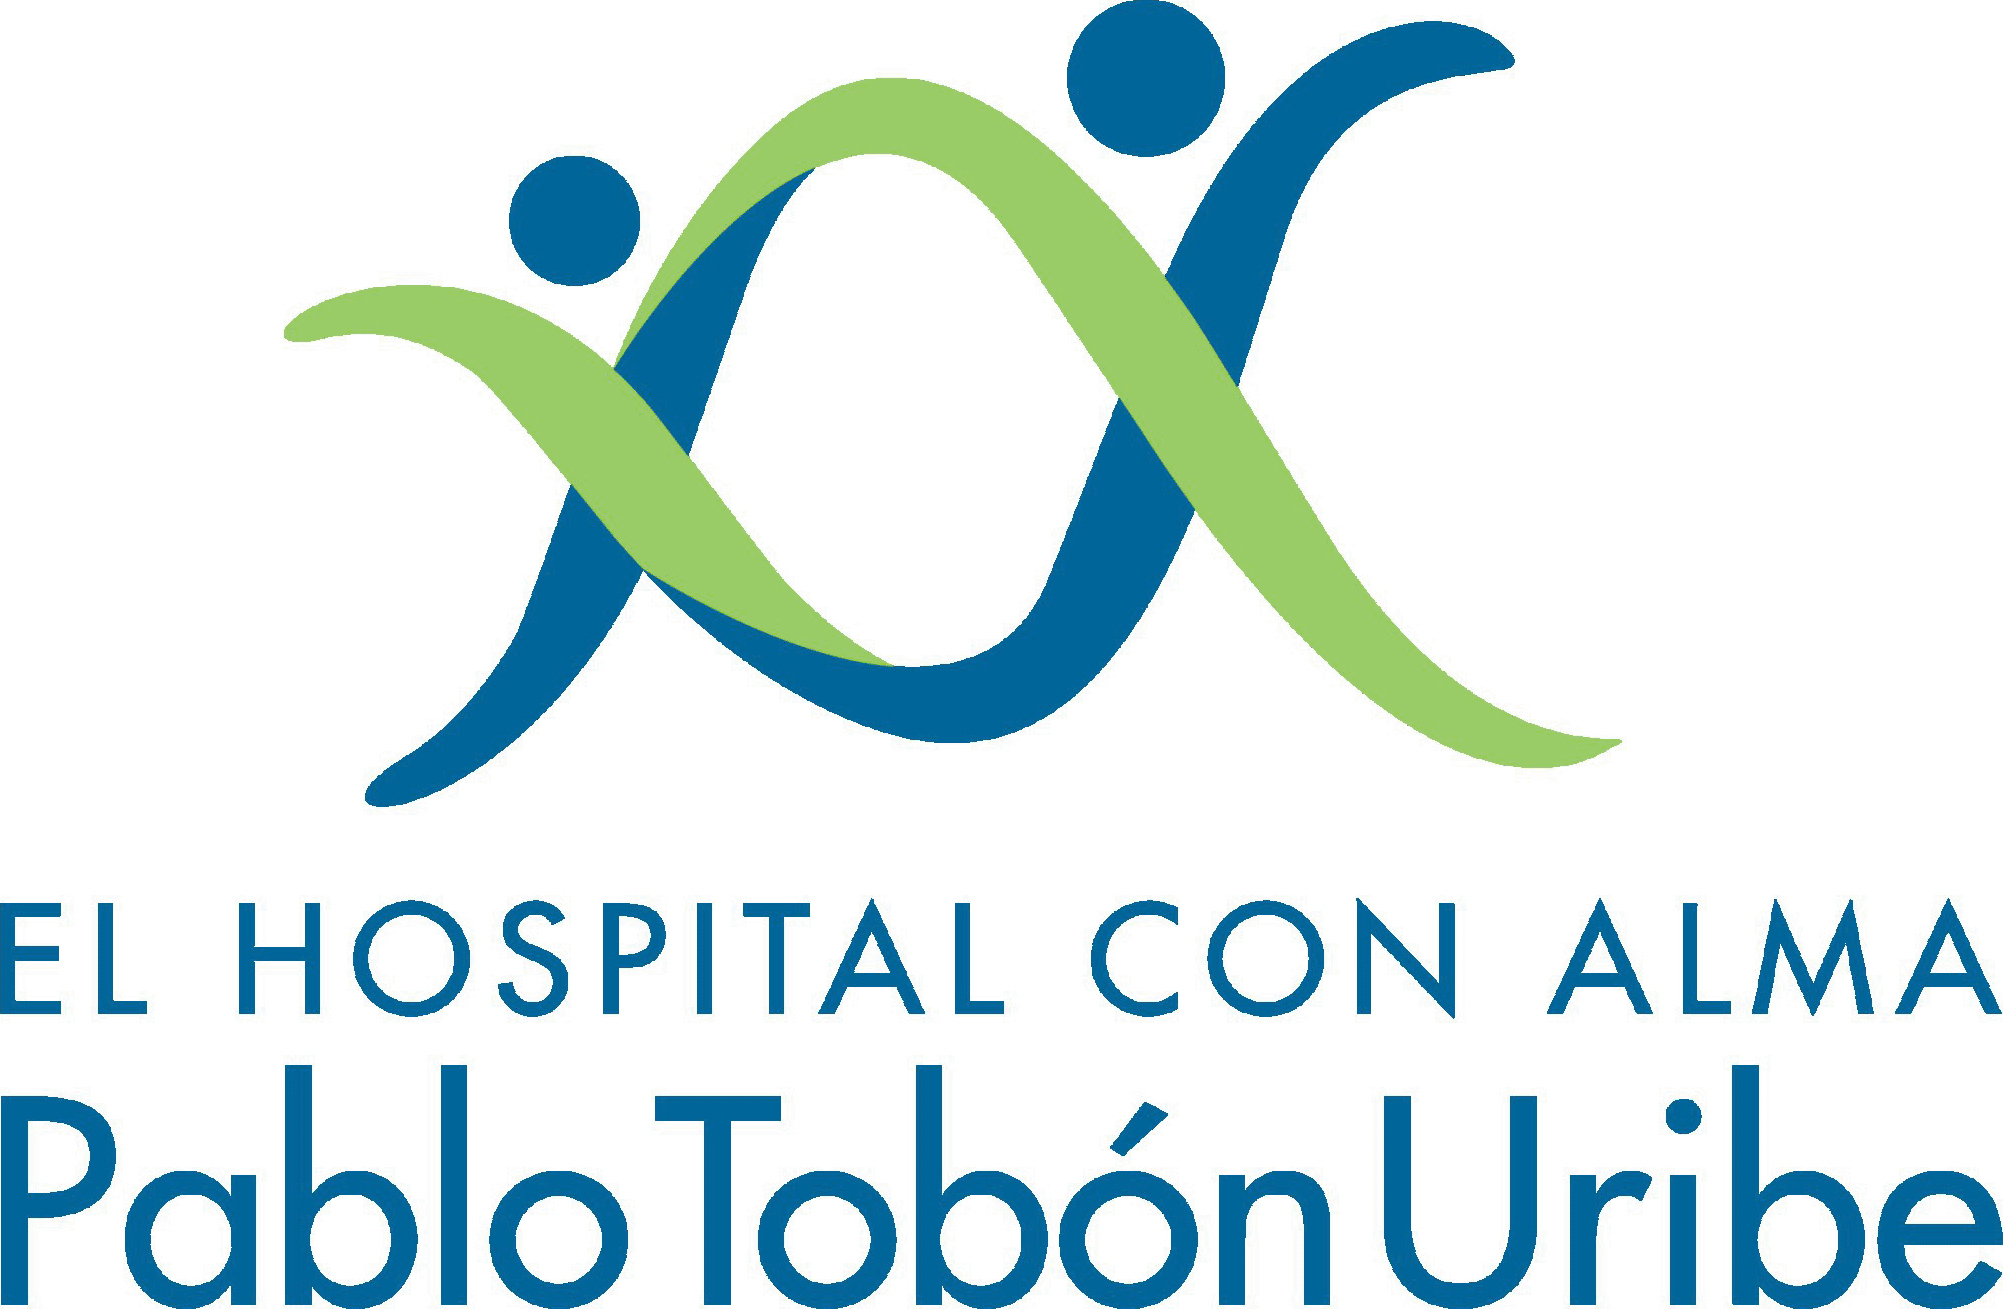 Press release: Hospital Pablo Tobón Uribe joins Patient Network Explorer, expanding Clinerion’s patient coverage to Colombia.